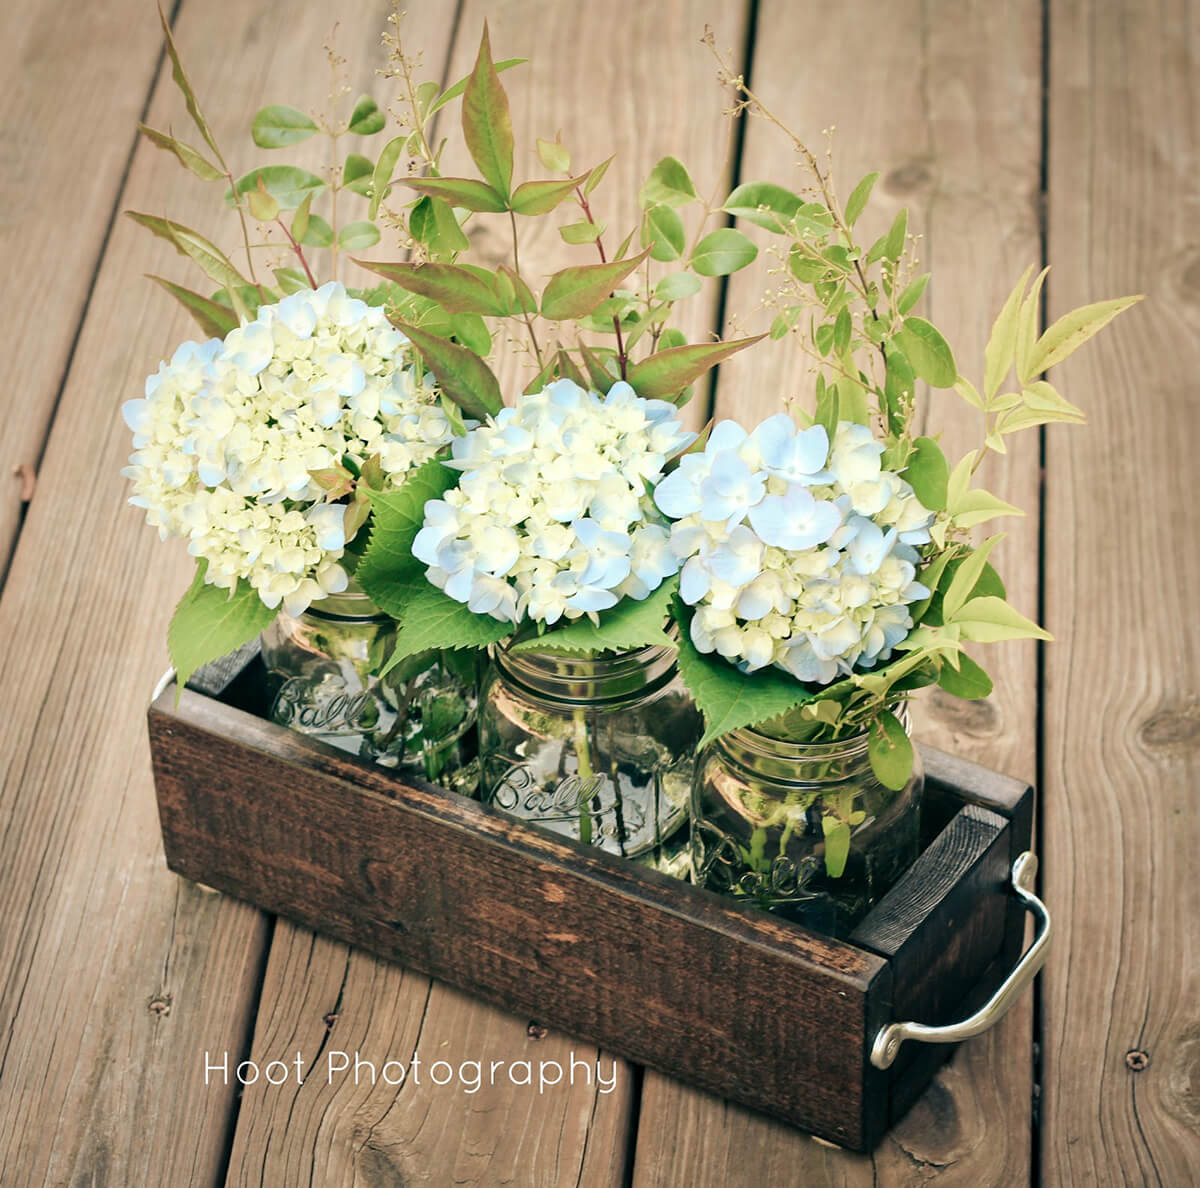 15 Charming DIY Flowerbox Centerpiece Designs You Will Want To Craft Right Now